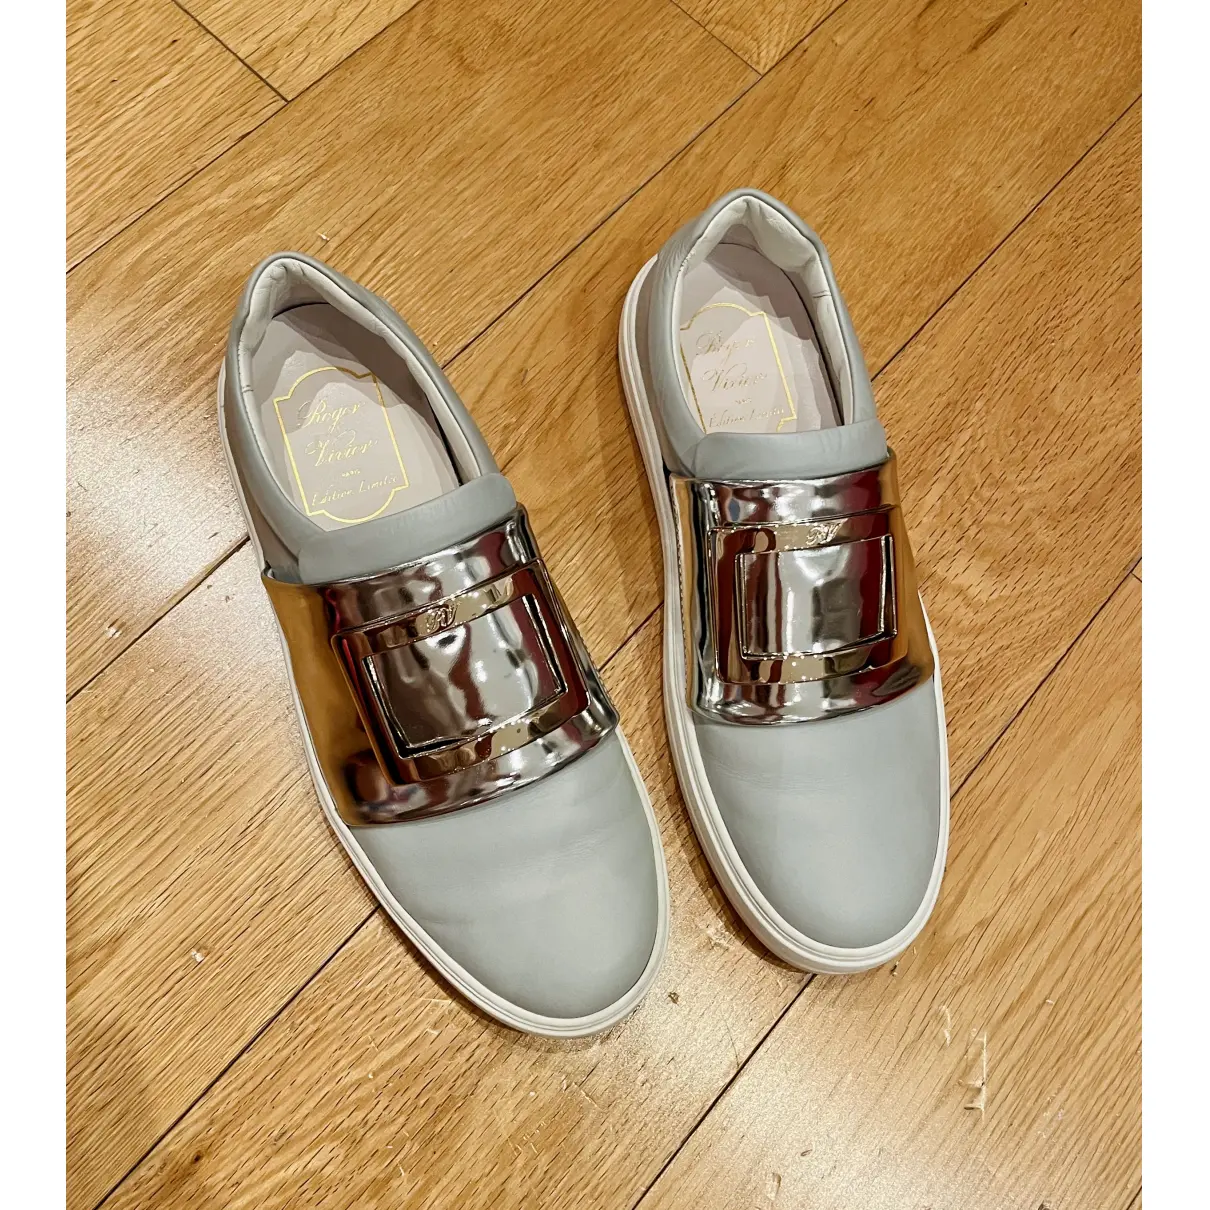 Buy Roger Vivier Sneaky Viv Strass Buckle leather trainers online